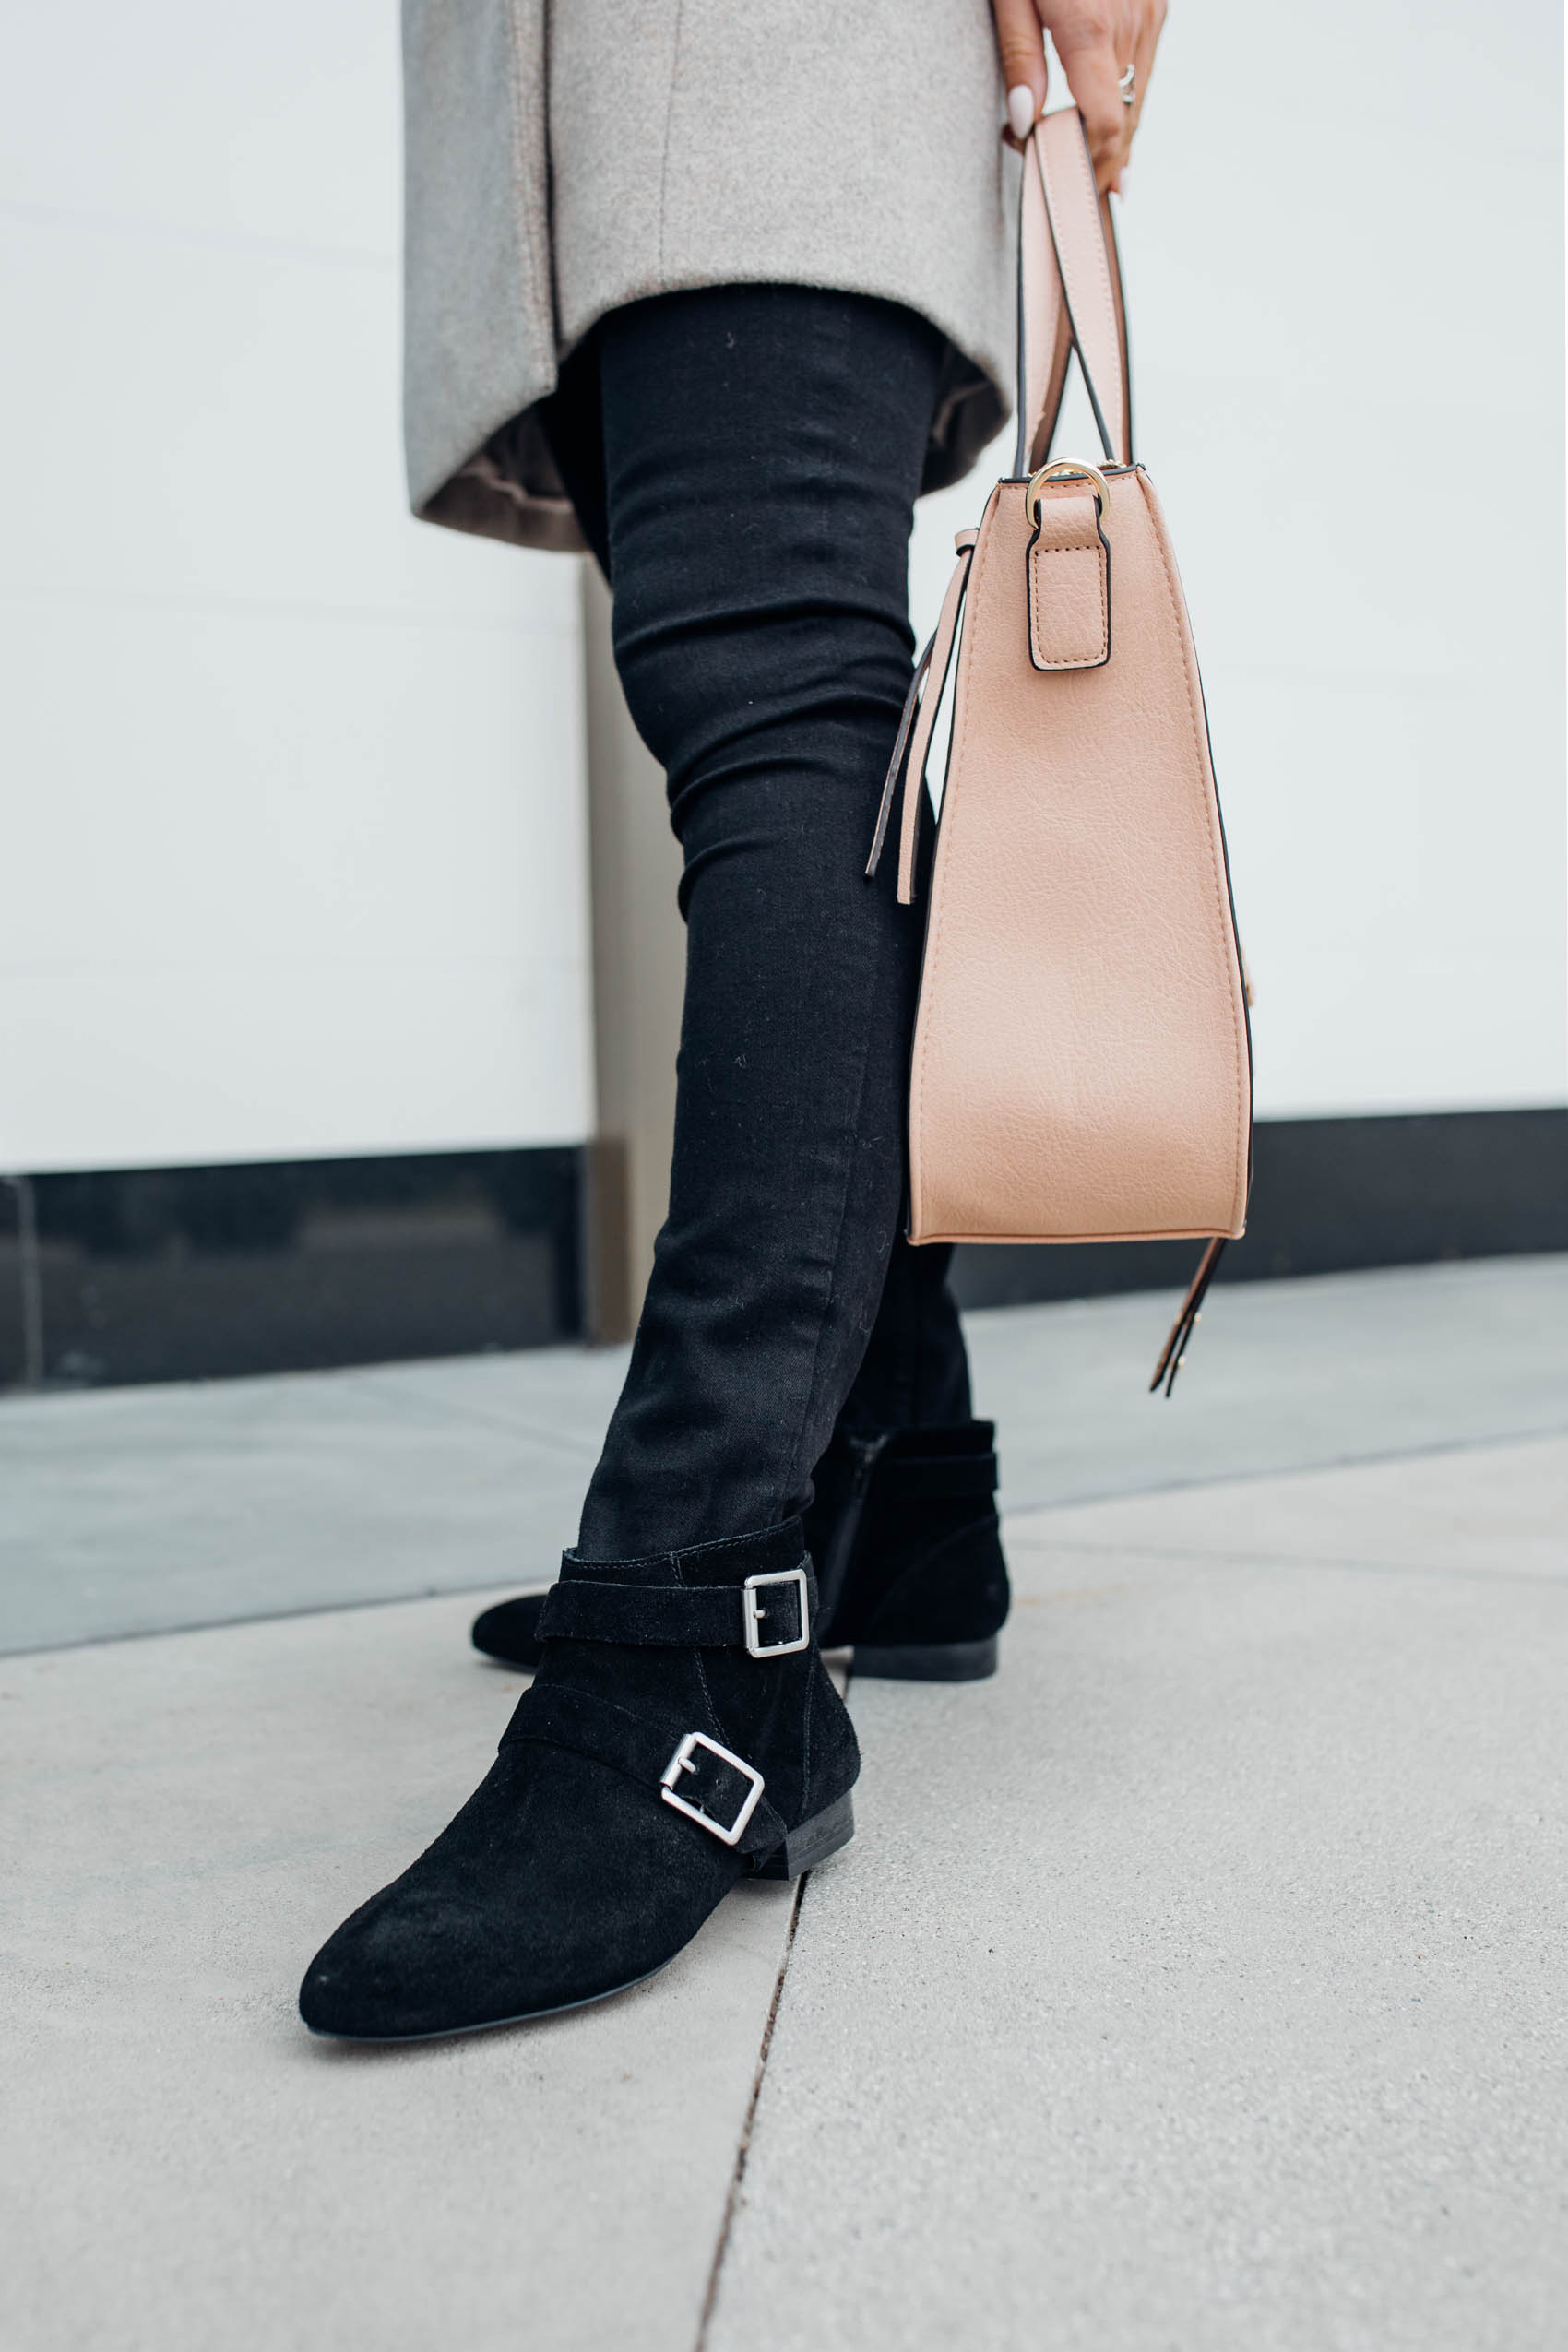 Blogger Hoang-Kim wears Sole Society suede ankle booties